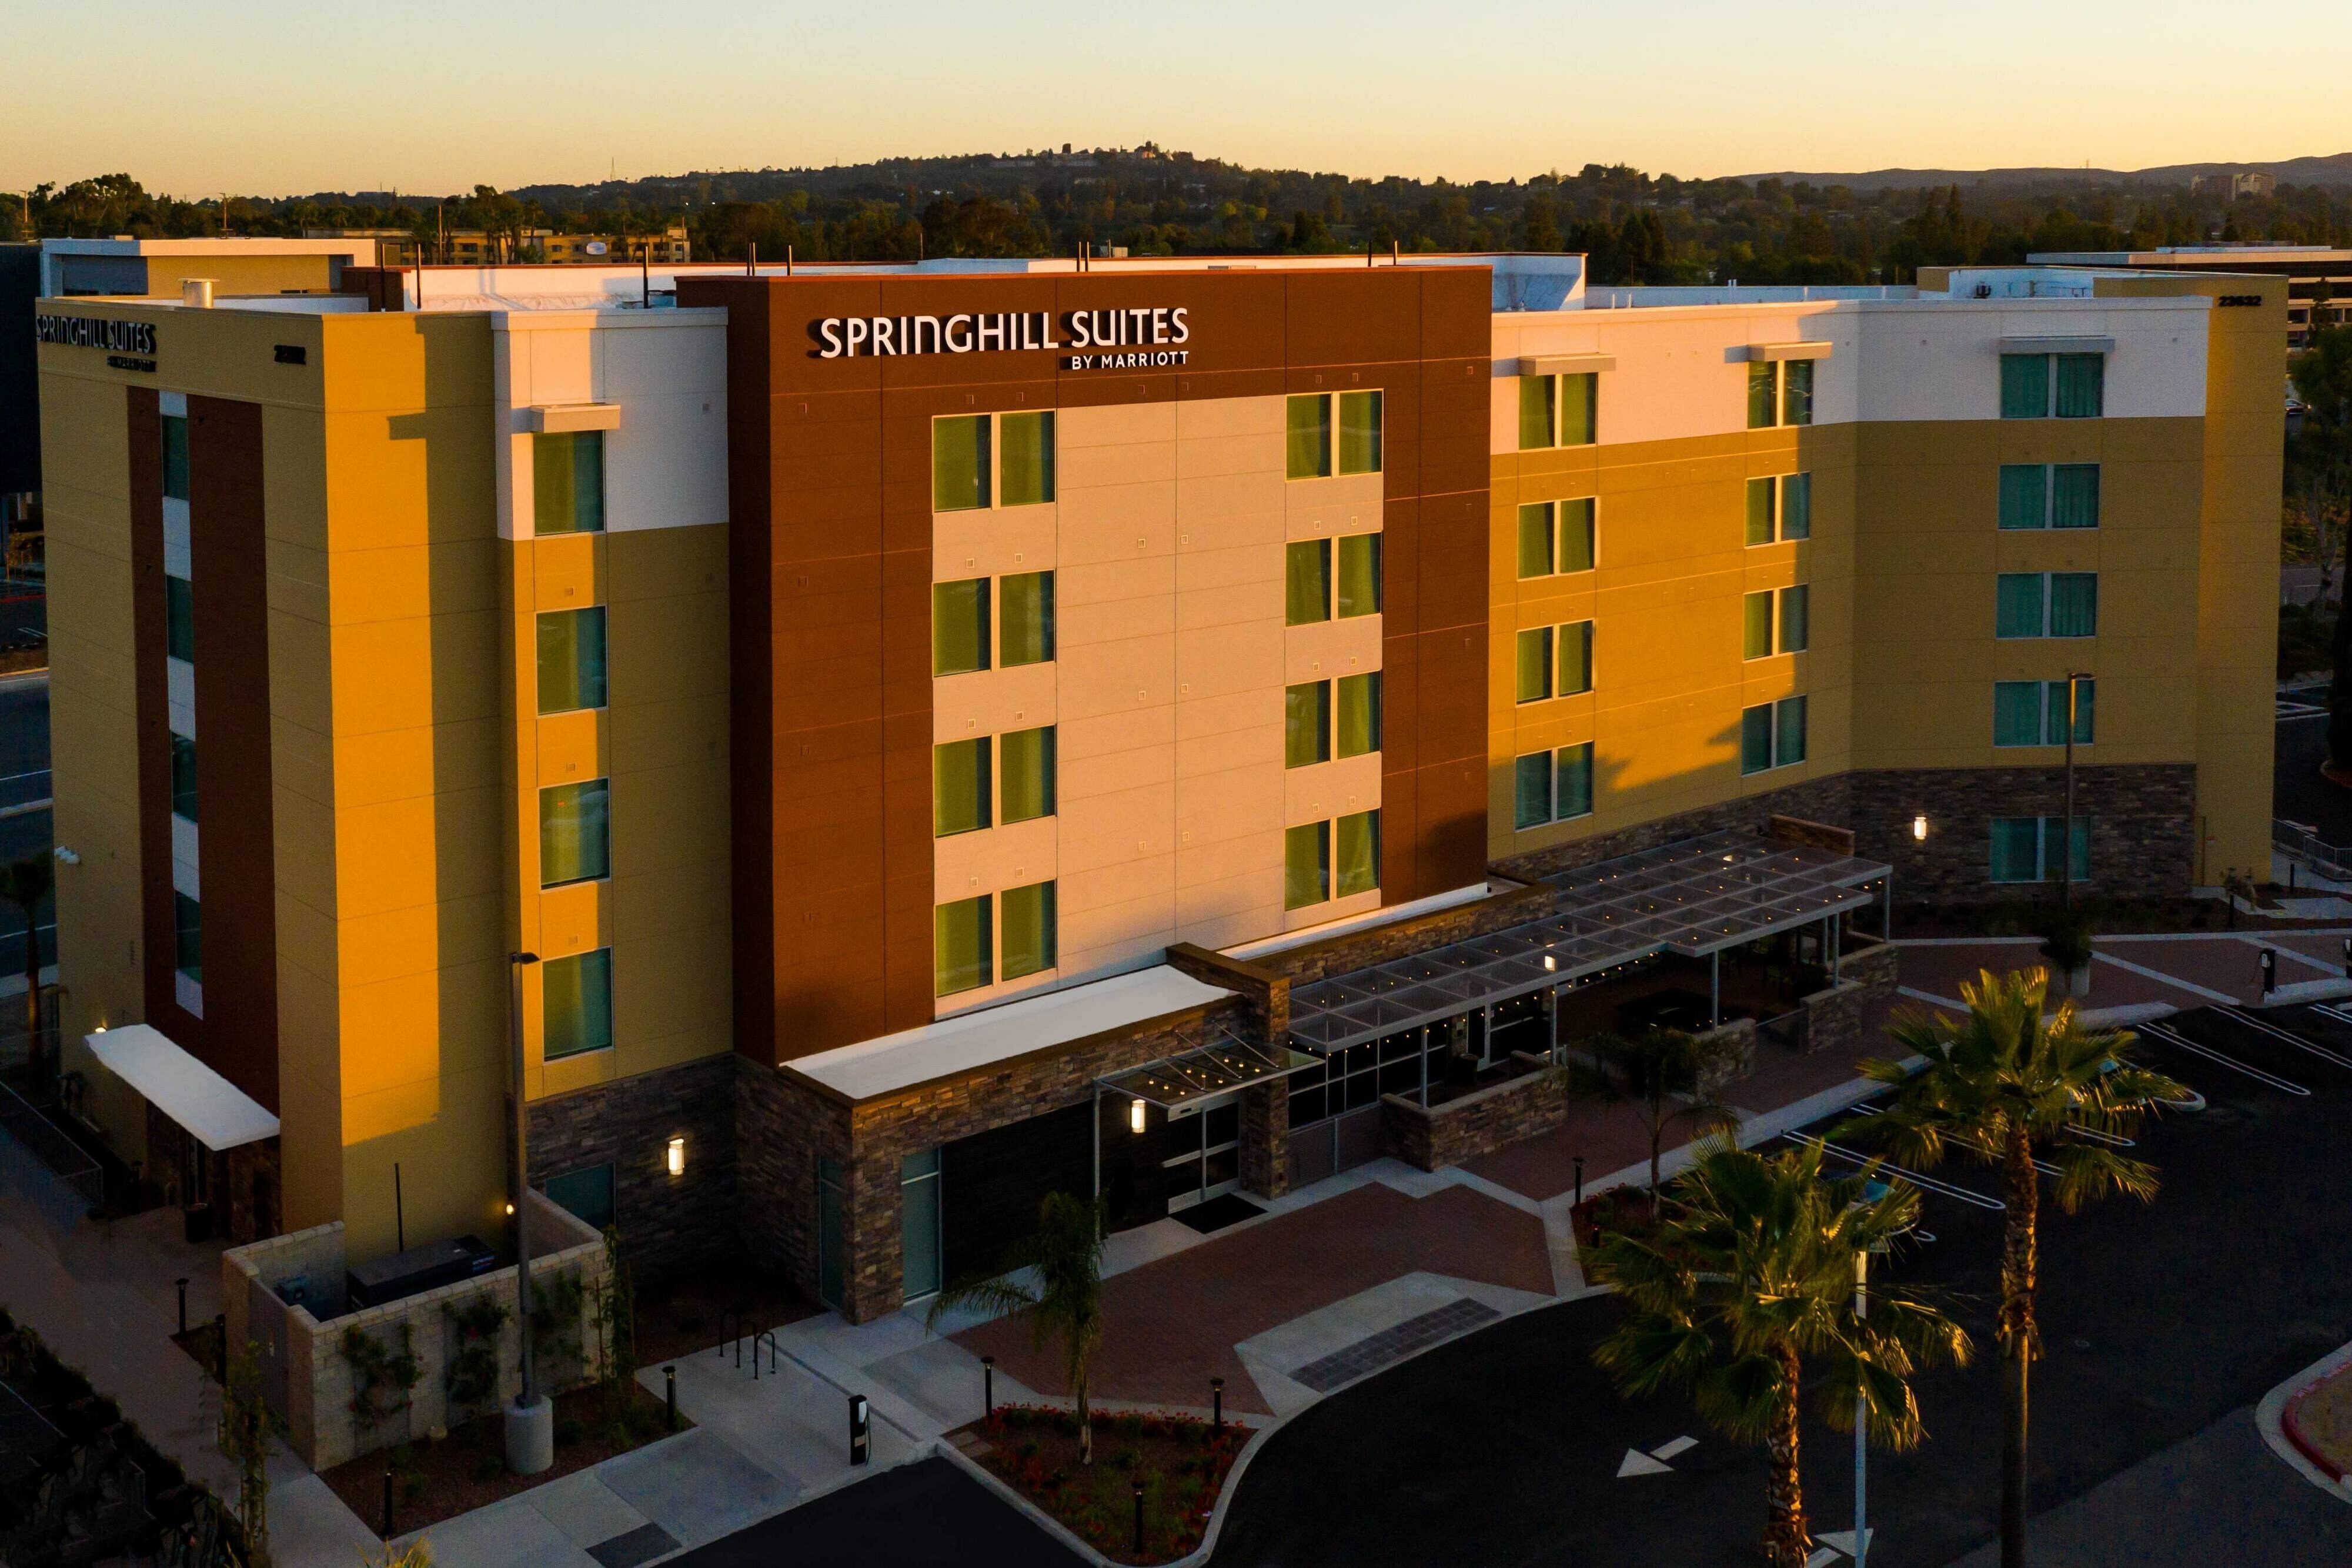 Photo of SpringHill Suites Irvine Lake Forest, Lake Forest, CA